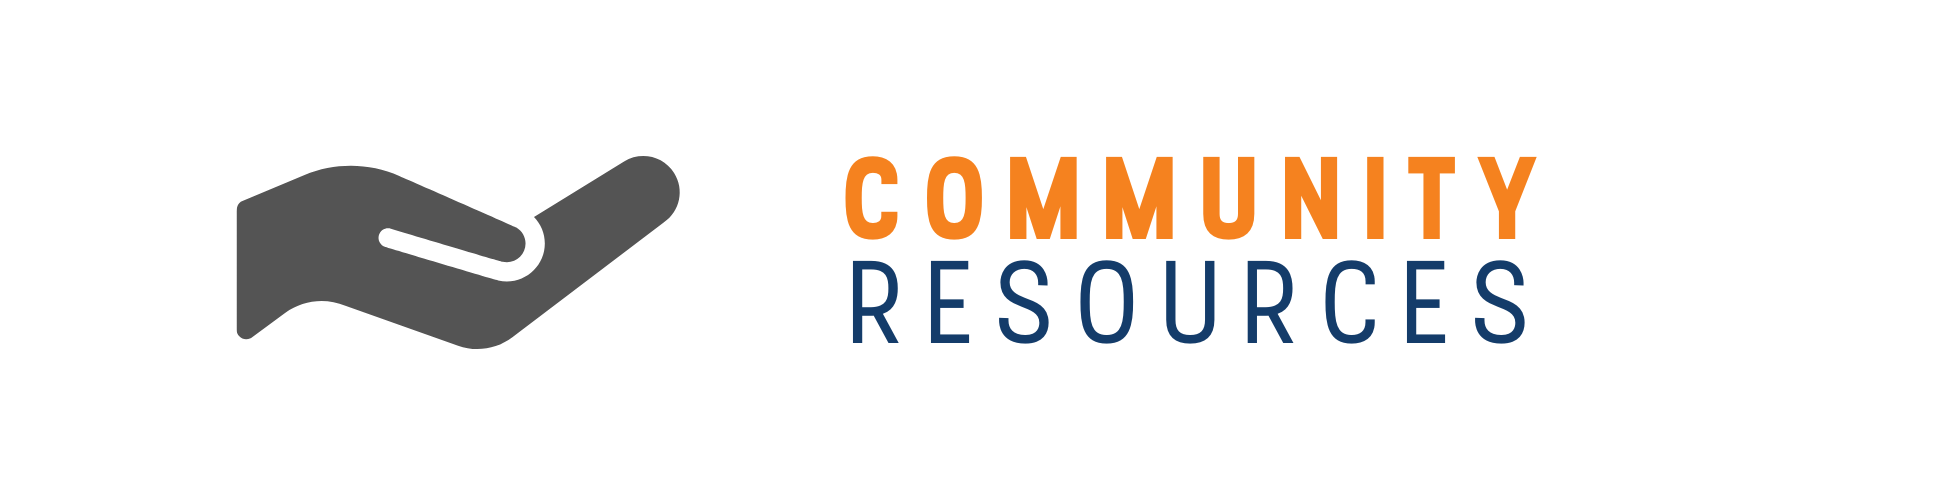 Community Resources Webpage Banner